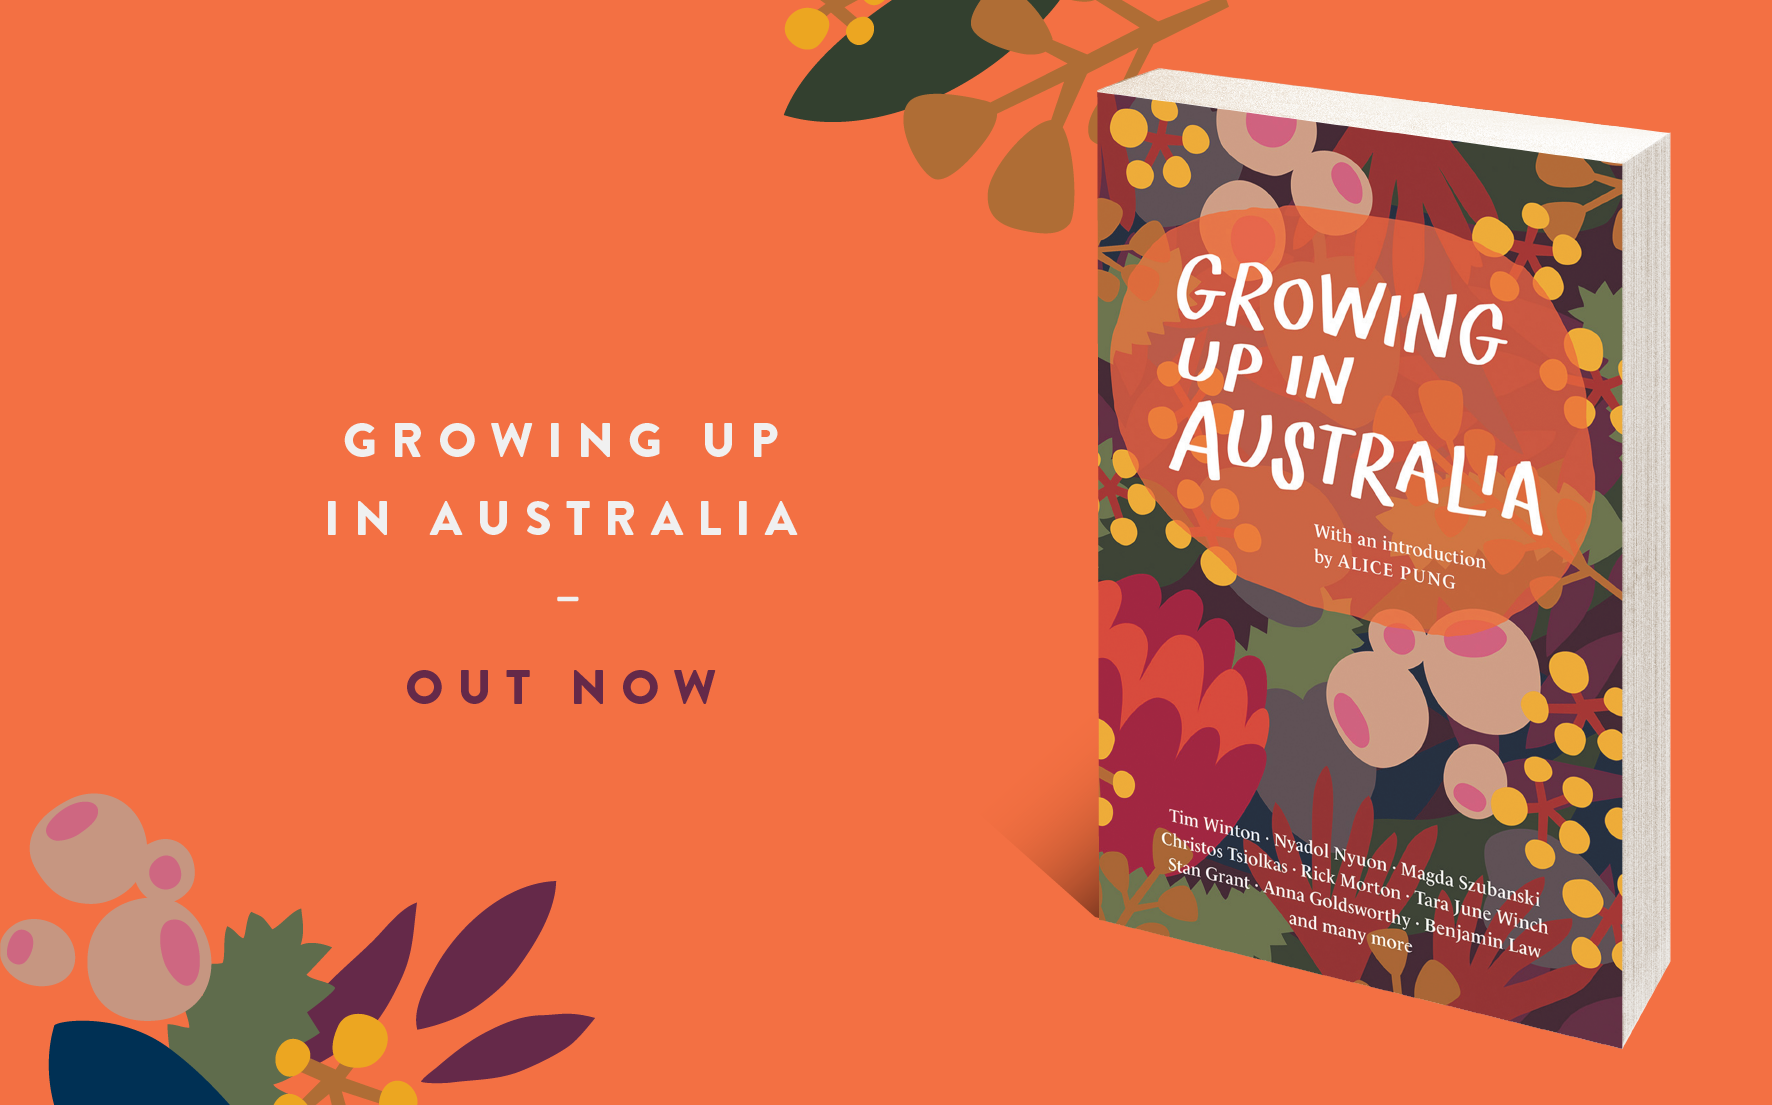 Growing Up in Australia is out now